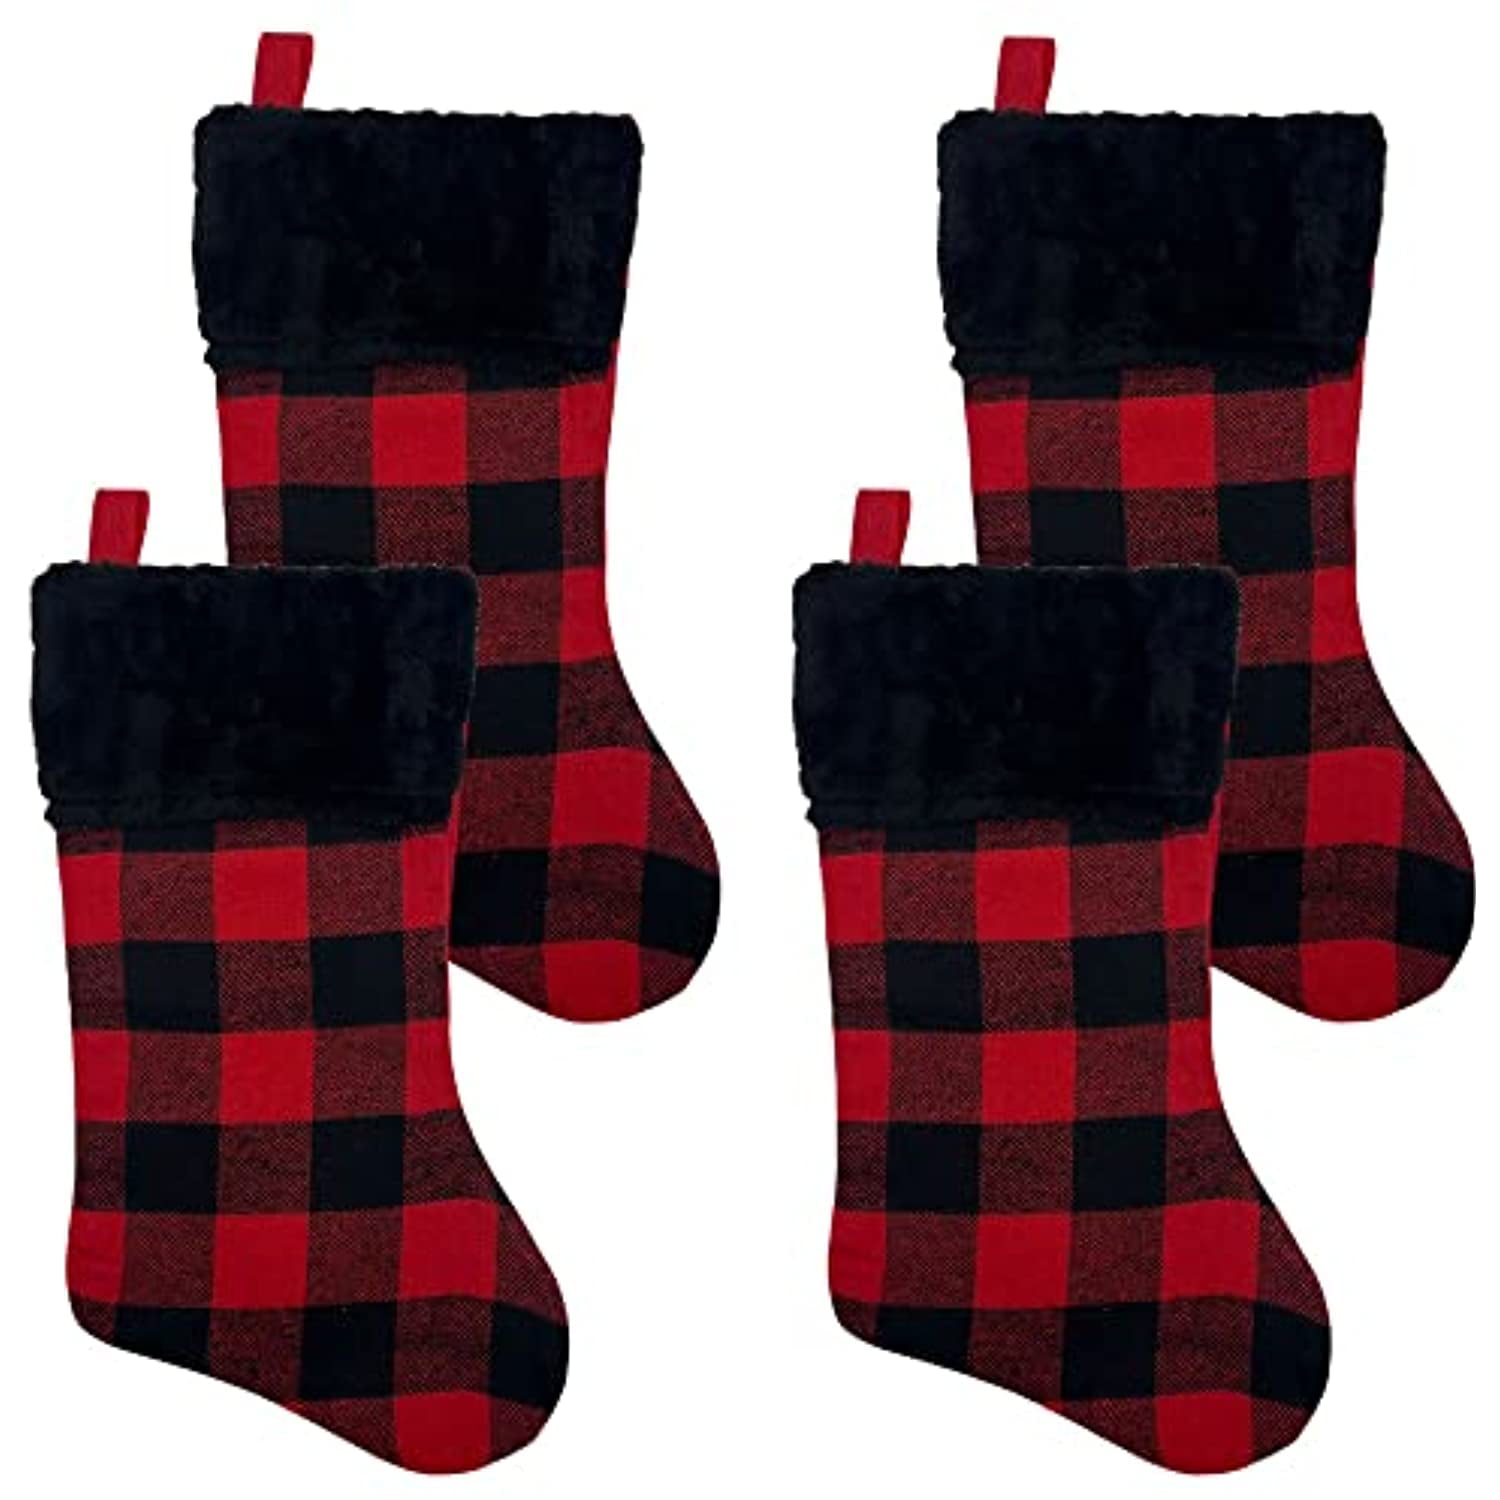 Details about   Set of 4 Personalized Christmas Stocking Plaid Buffalo with name Holiday 4pc 